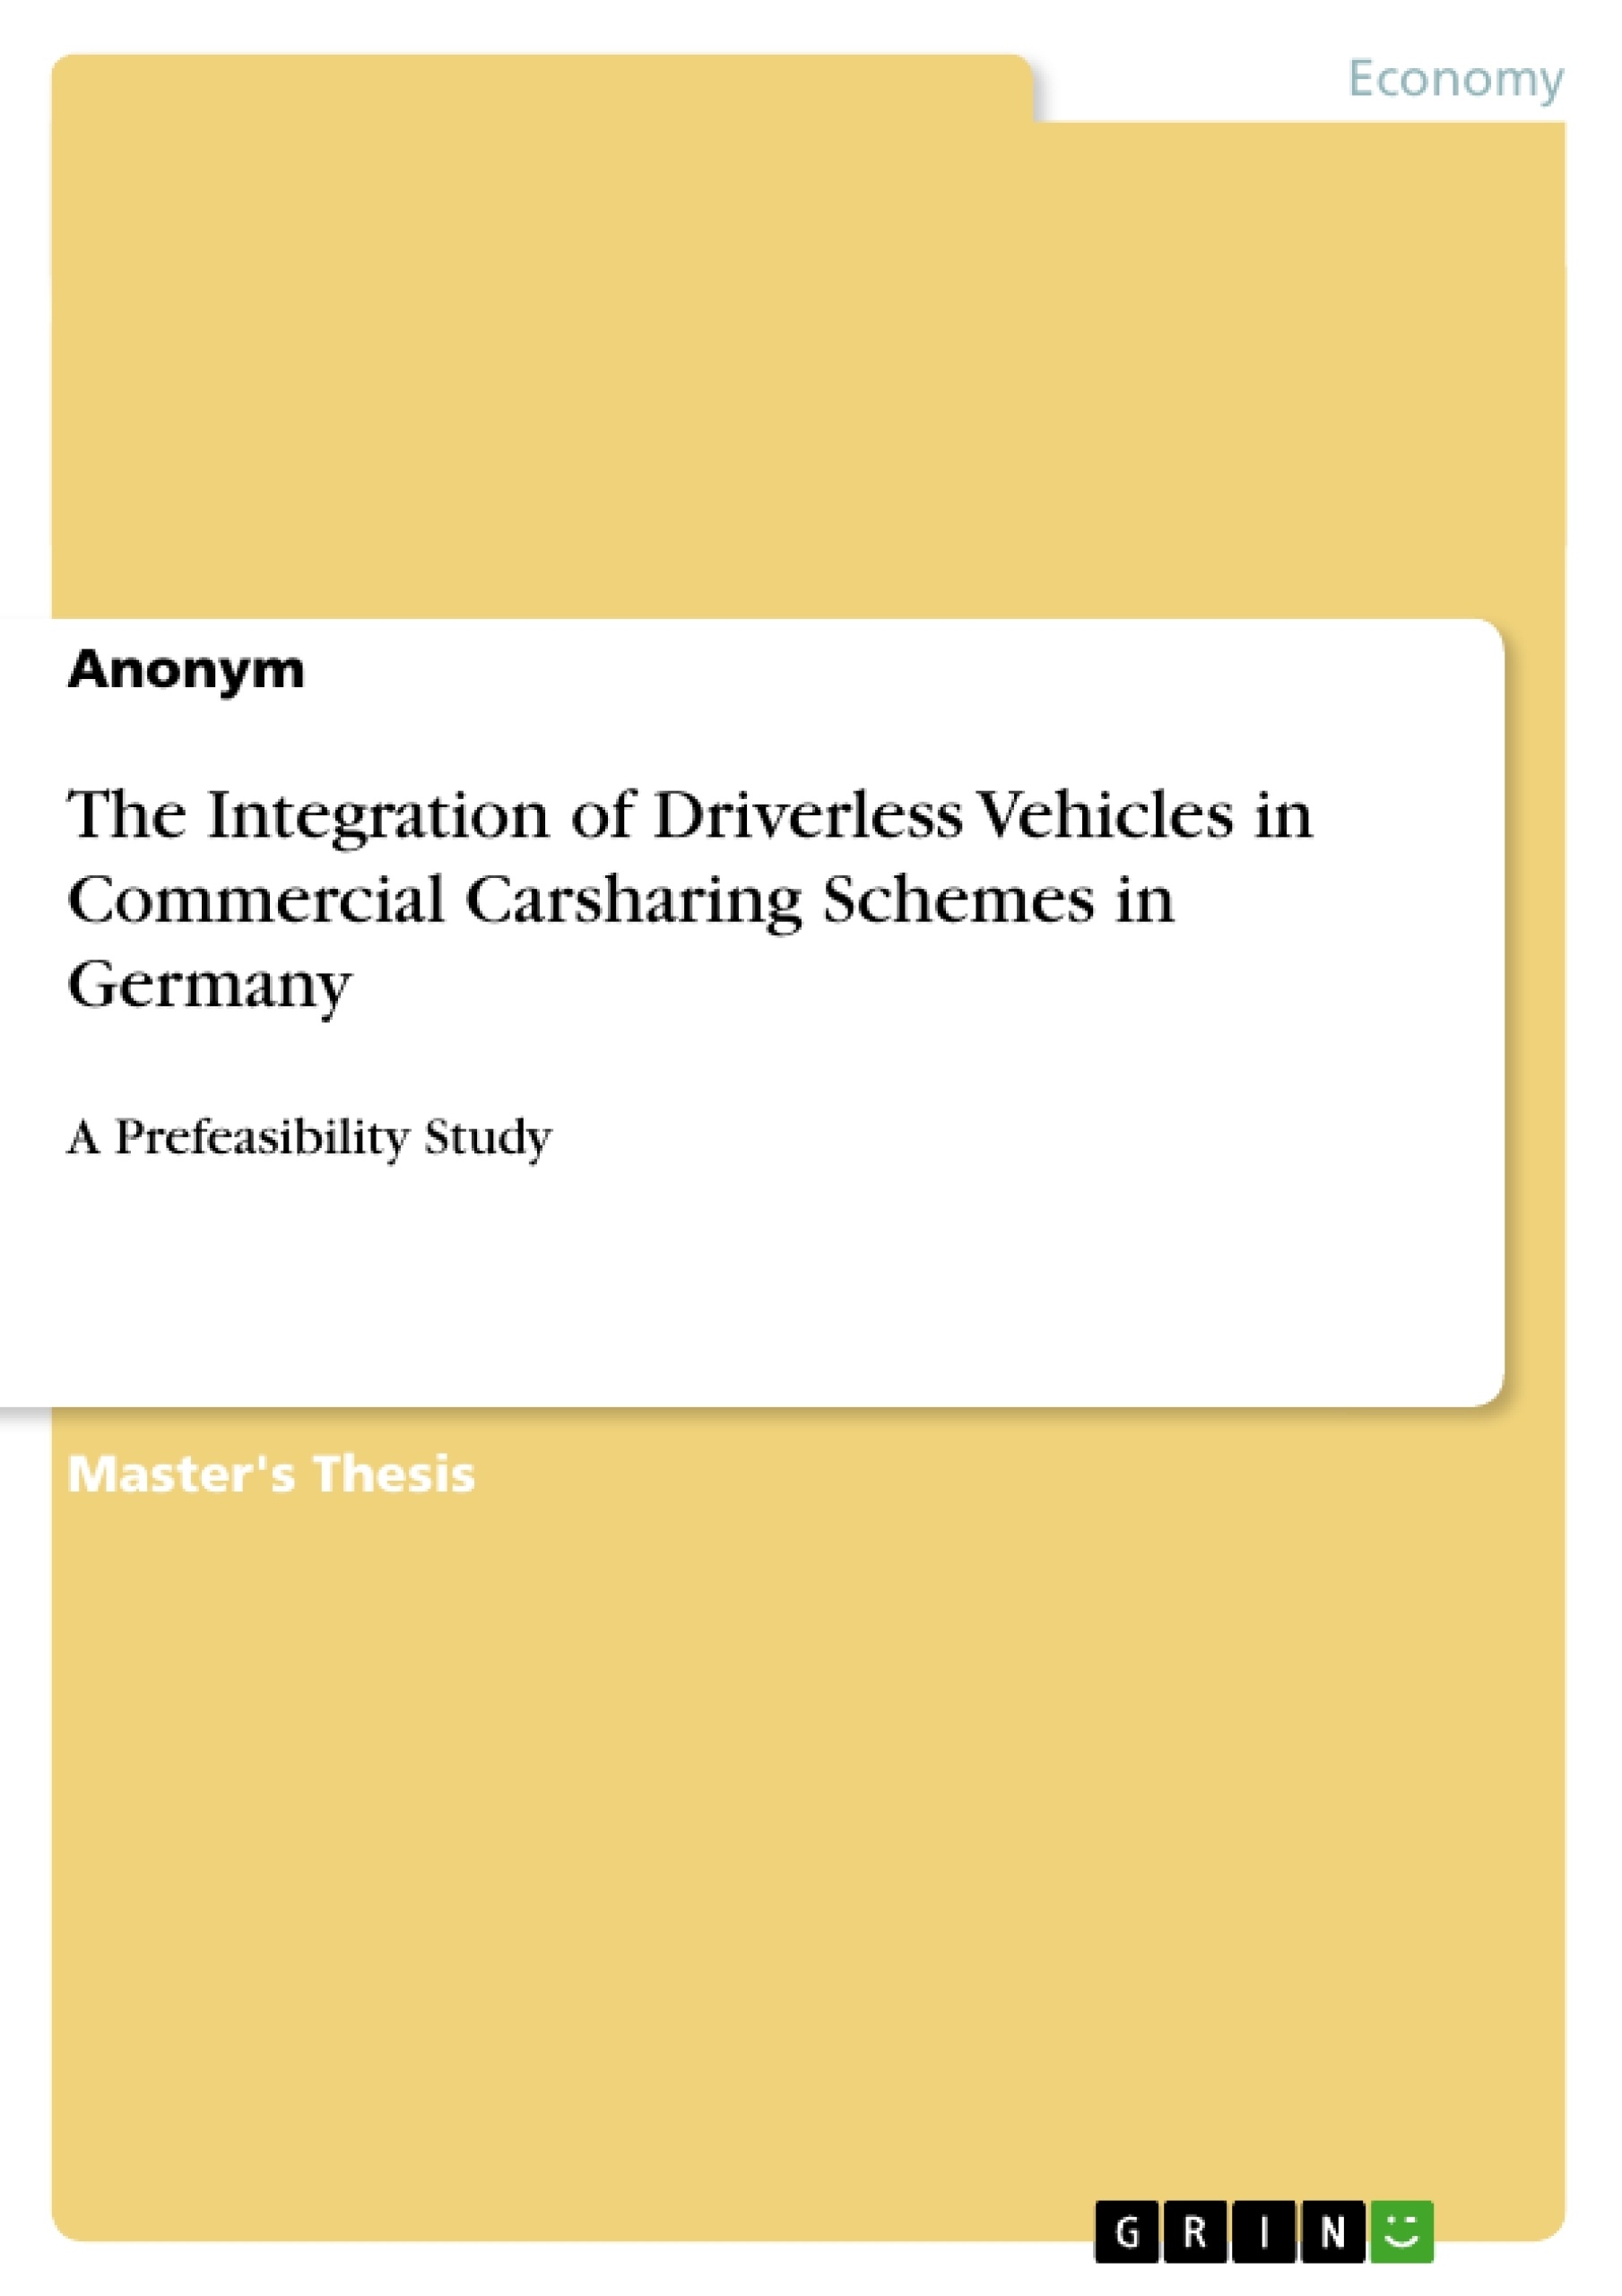 Title: The Integration of Driverless Vehicles in Commercial Carsharing Schemes in Germany